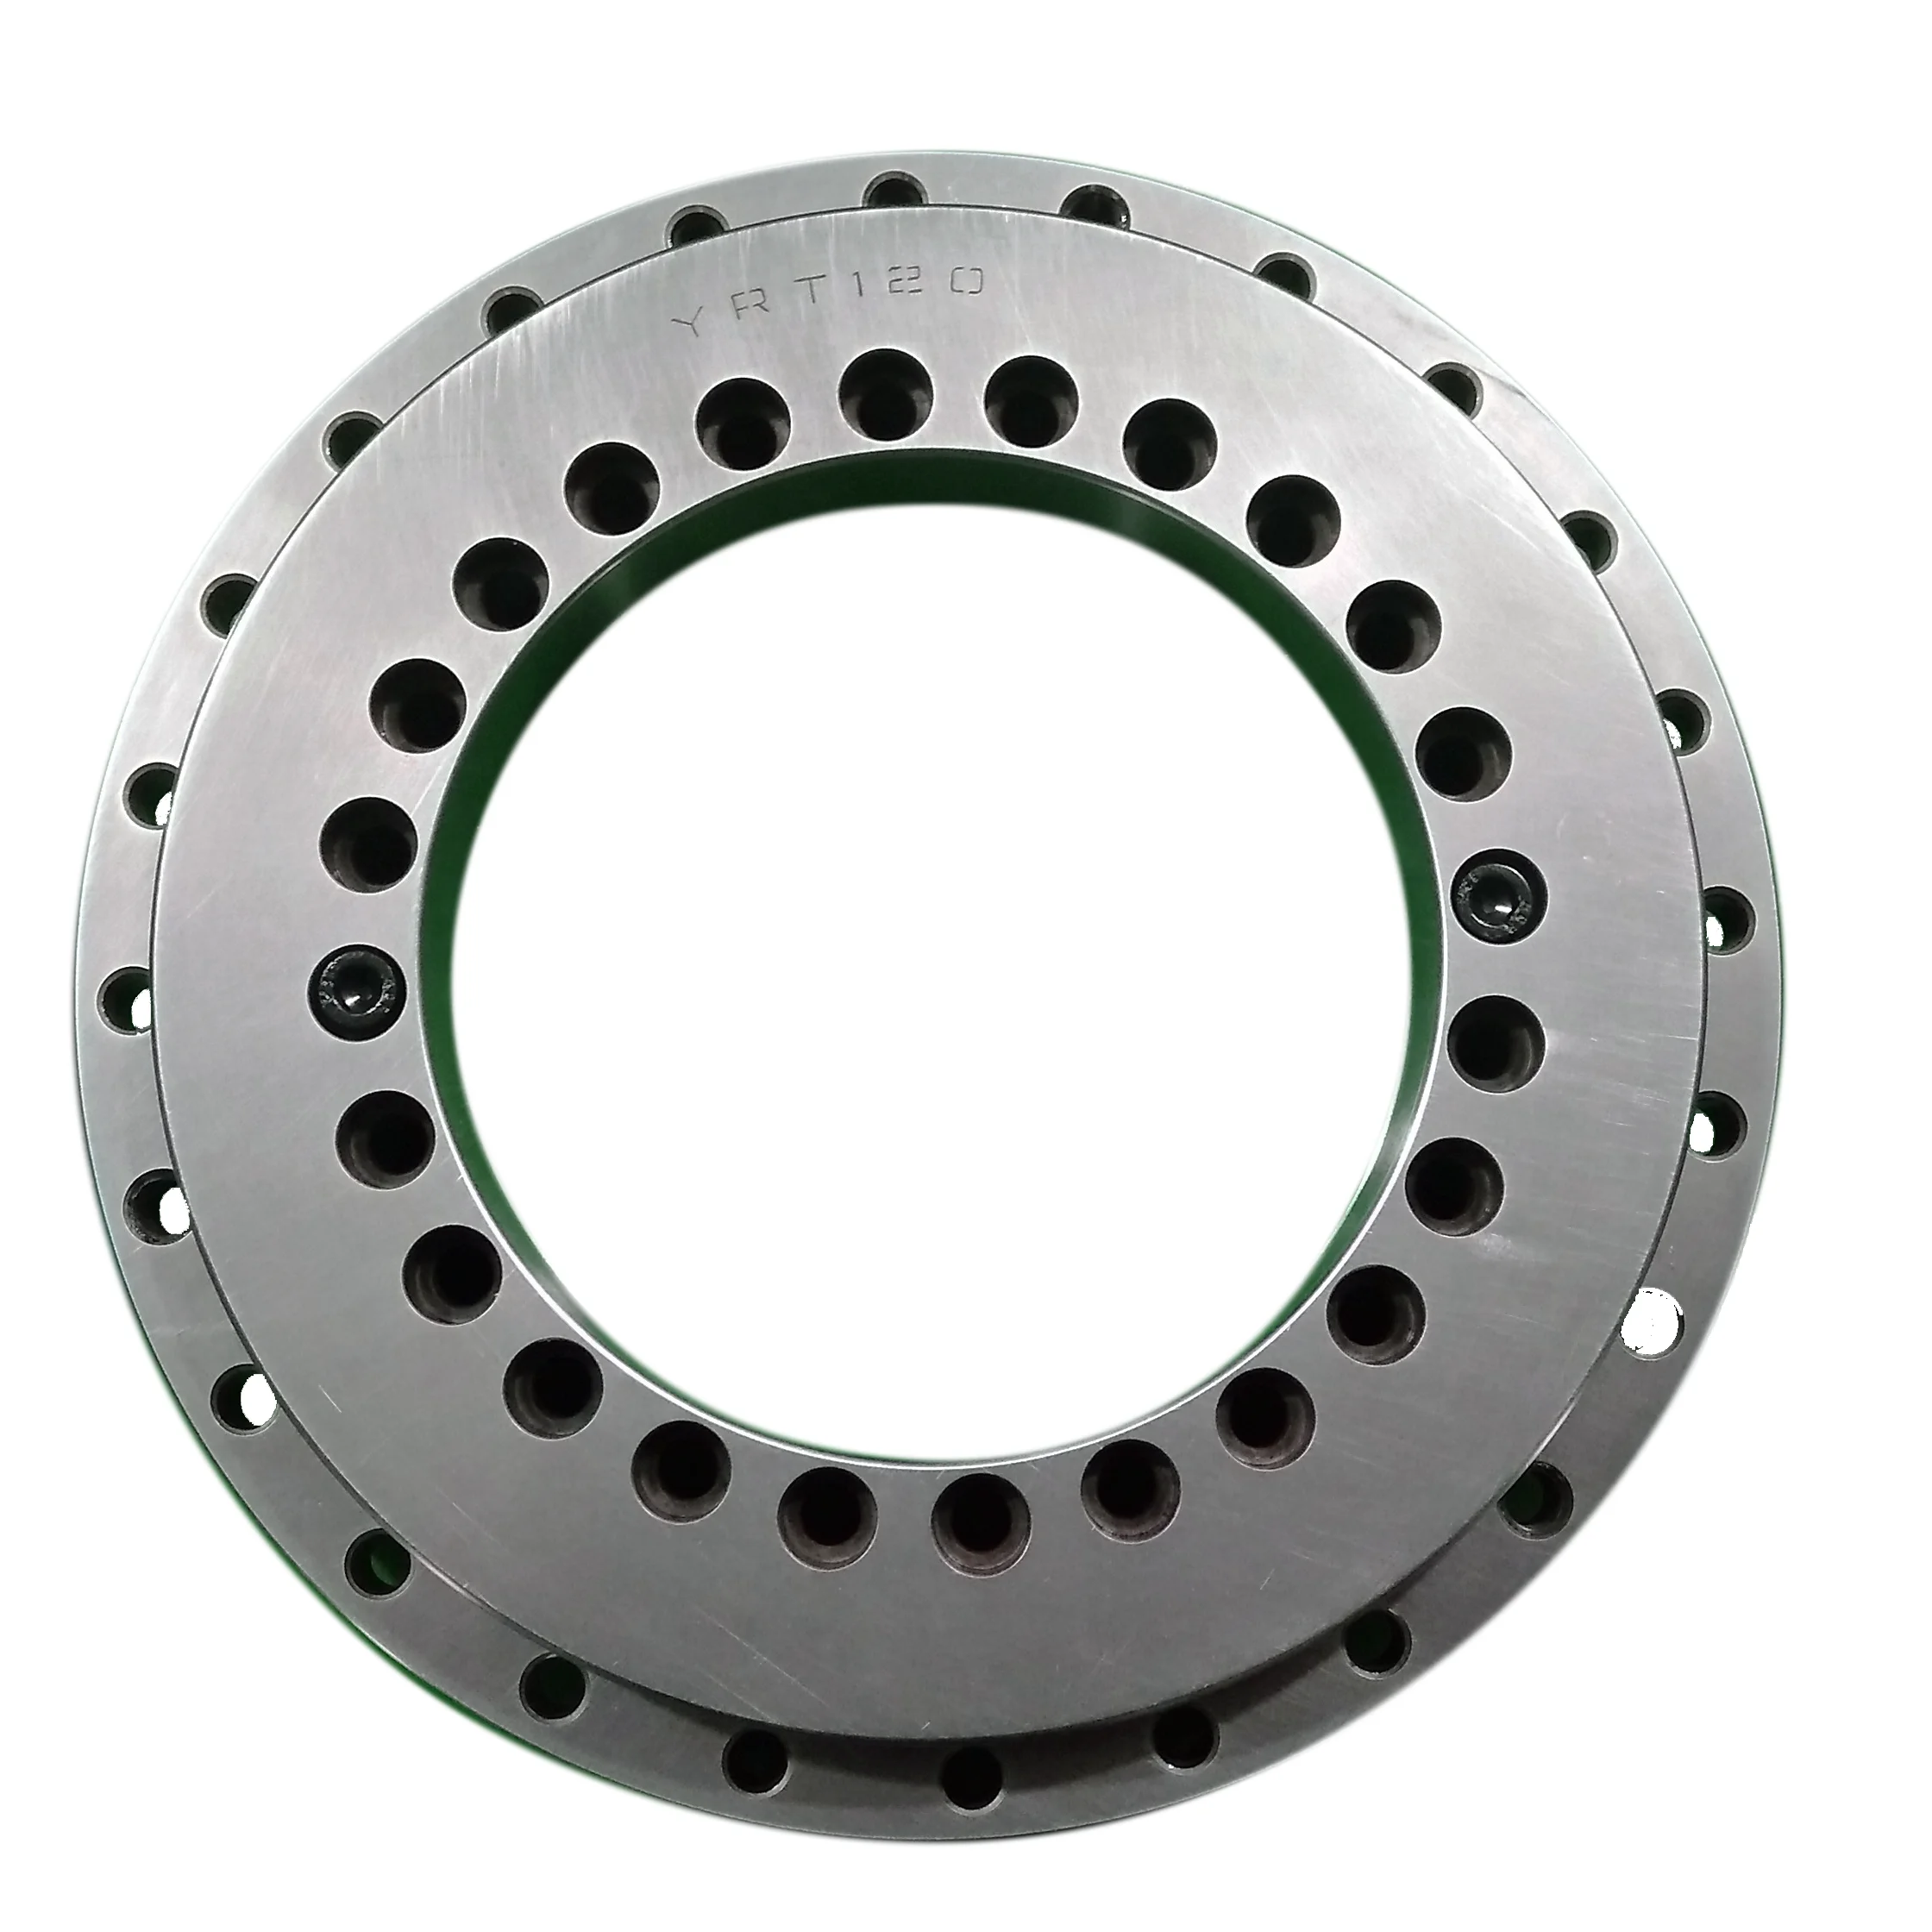 

YRTS395P4 395*525*65mm axial and radial bearing yrs with angle measuring system made in china